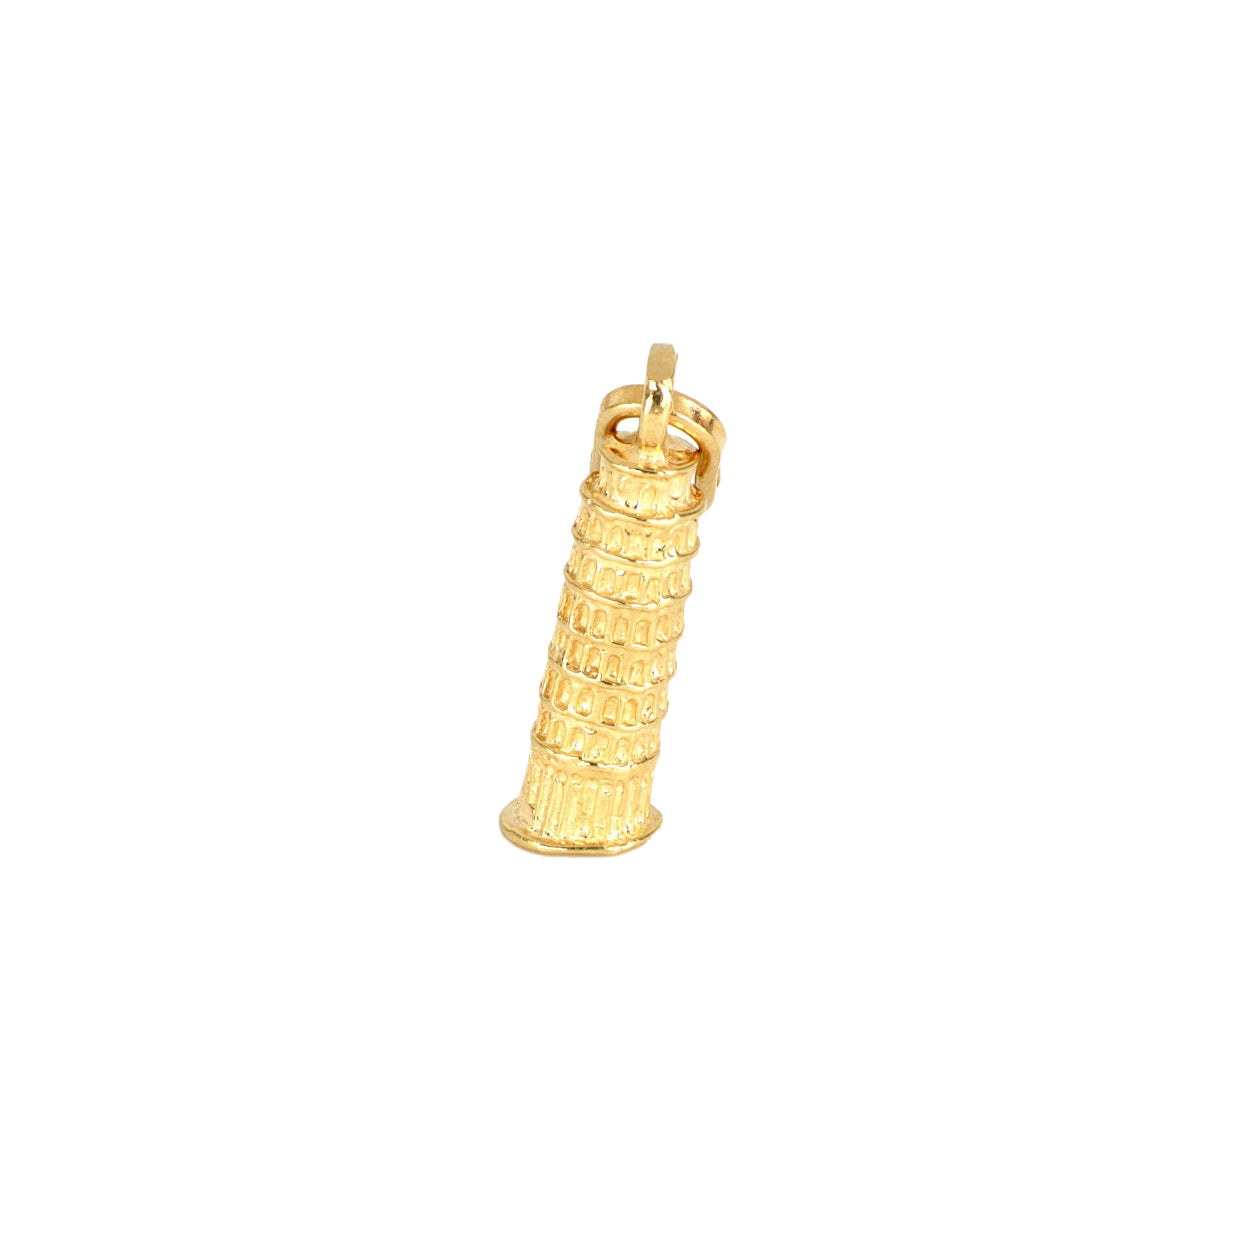 Pisa Leaning Tower Charm